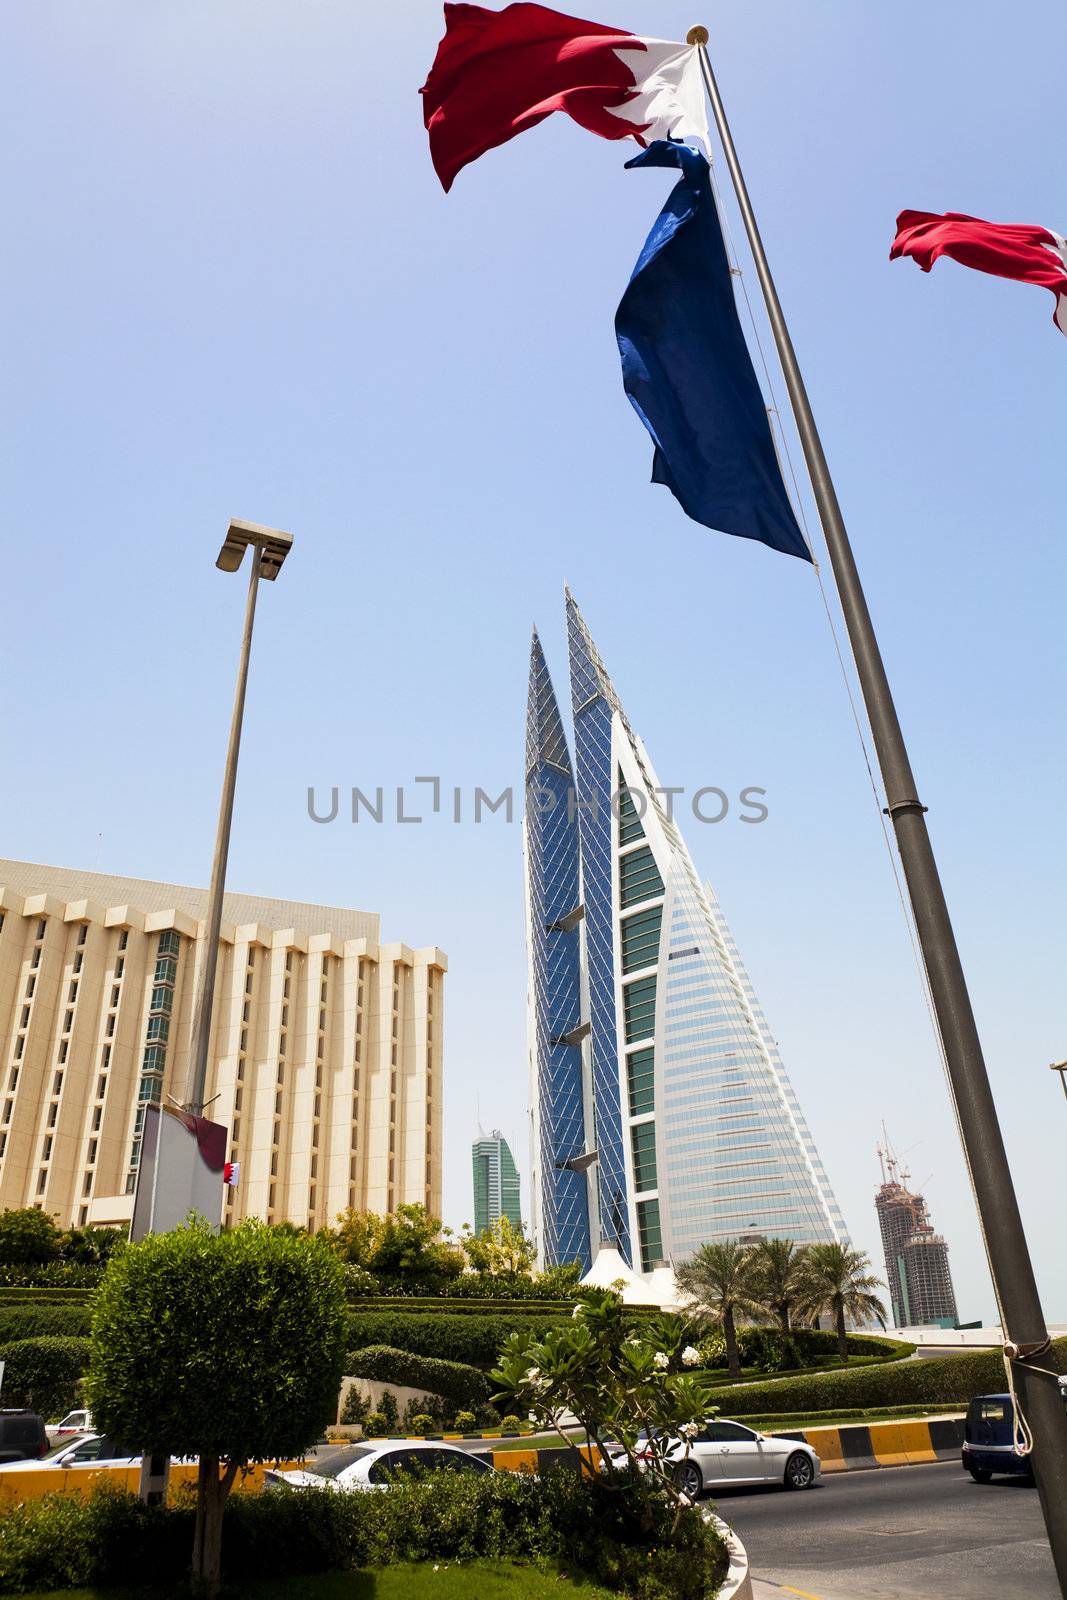 Image of Bahrain's iconic building, the Bahrain World Trade Center and Bahrain flags at Manama, Bahrain.